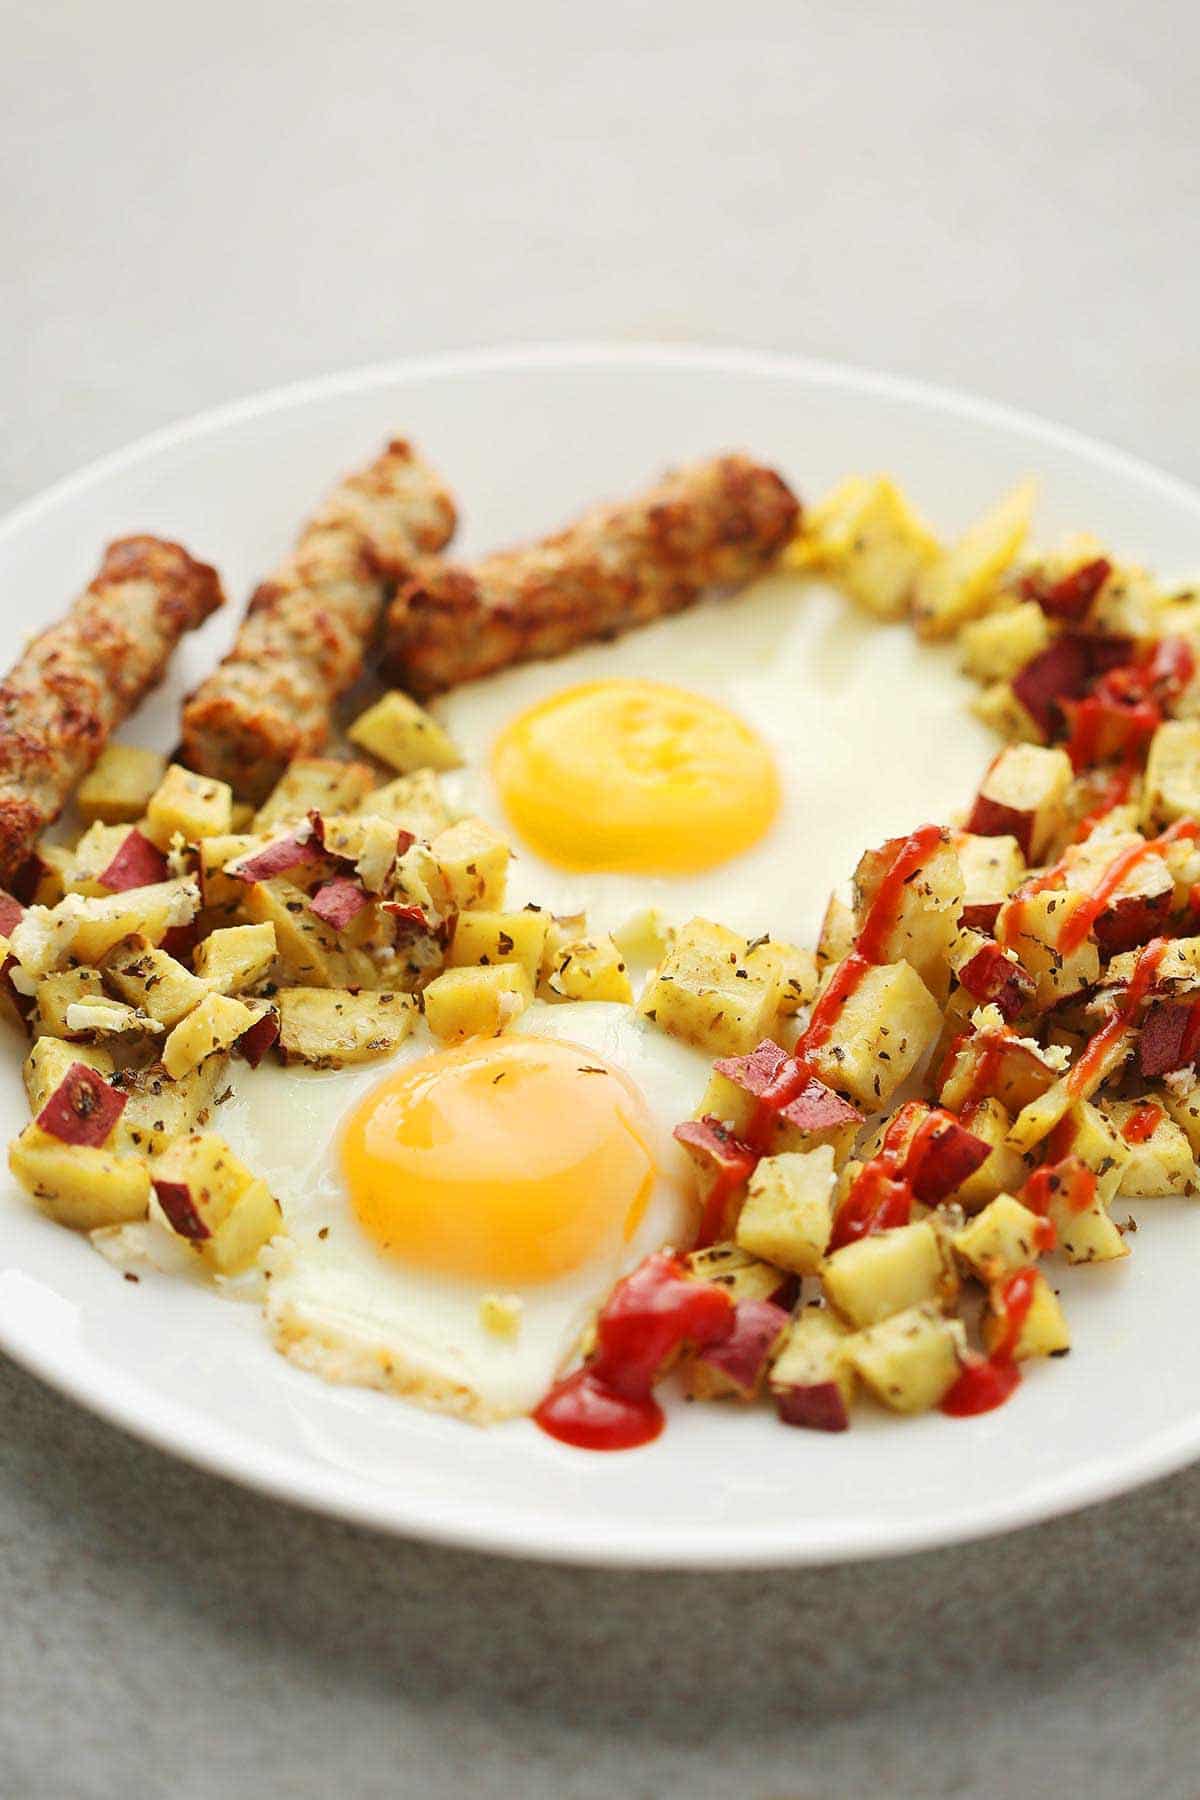 white plate with sunny side up eggs, cubed potatoes with ketchup sauce